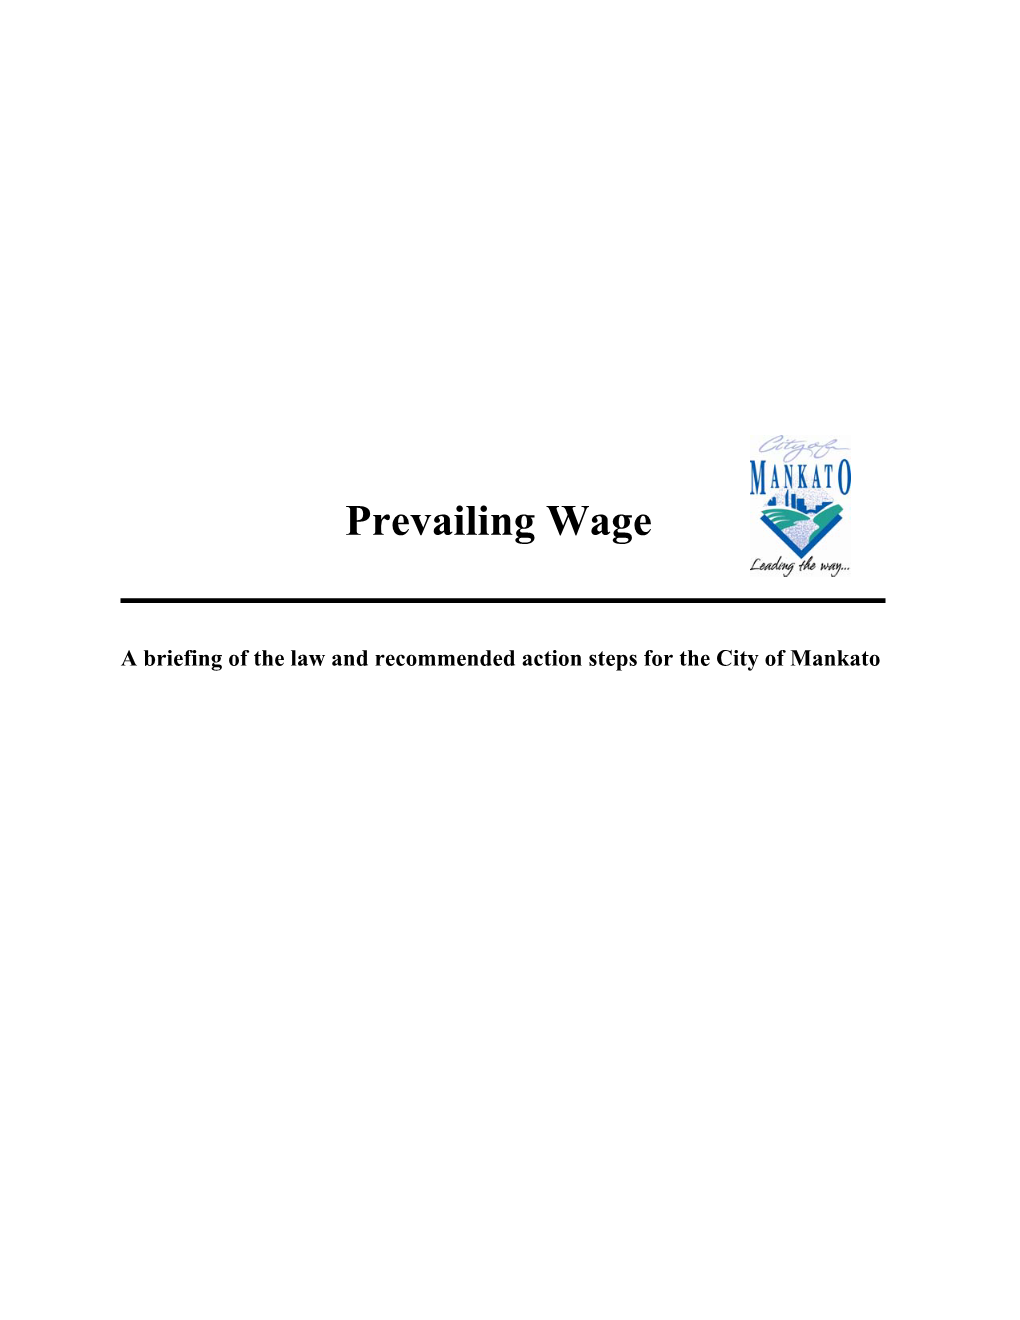 Prevailing Wage Study for Mankato, MN